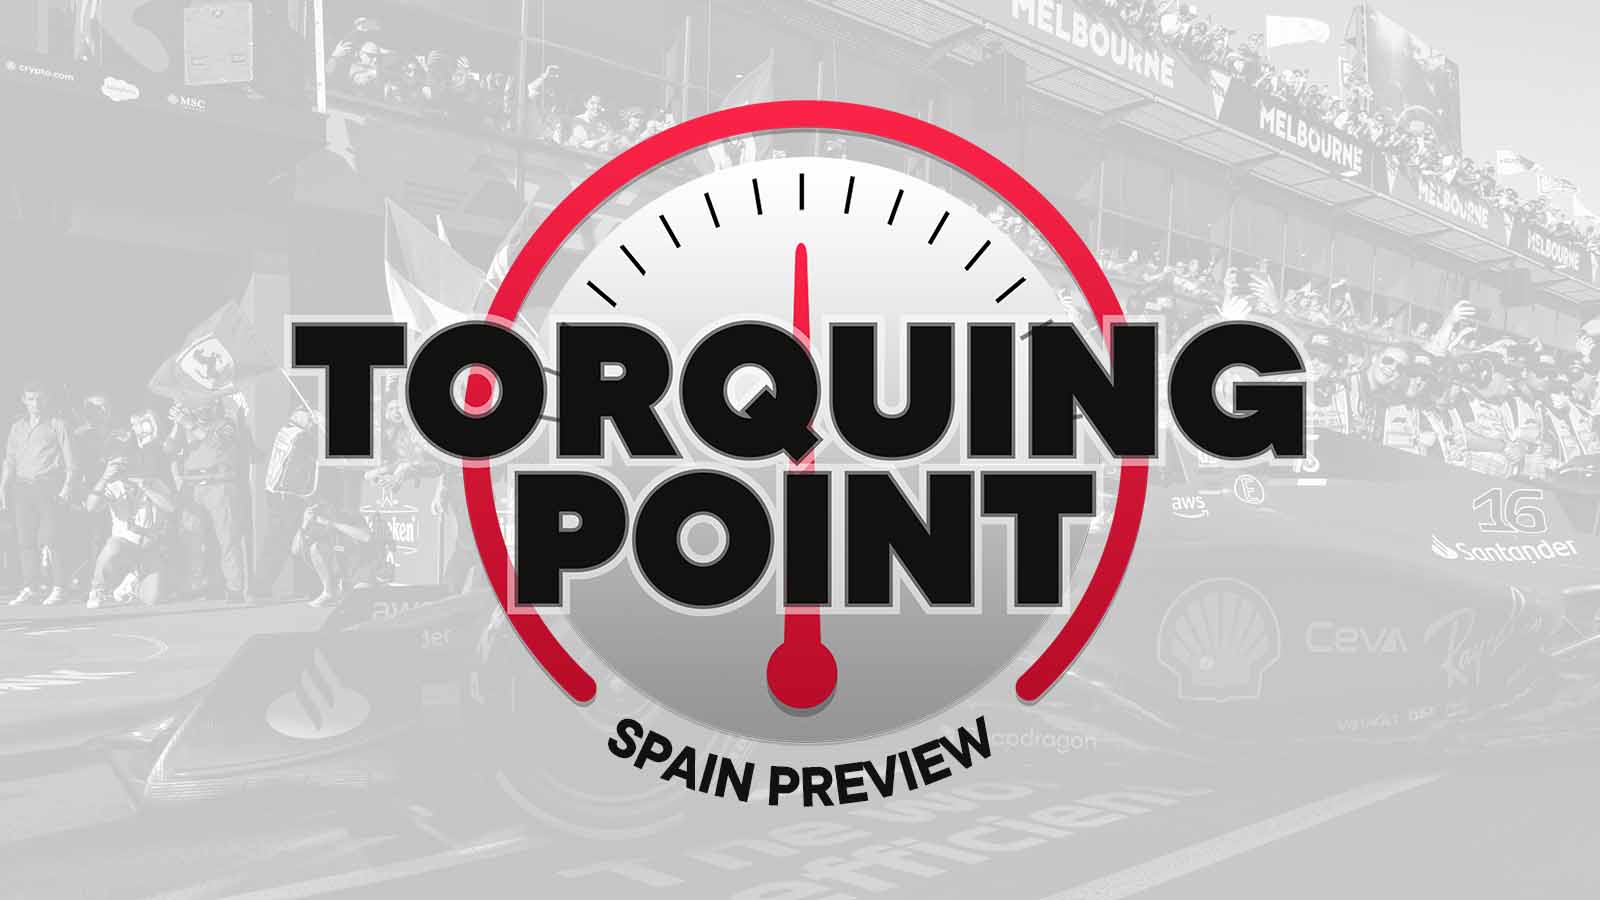 Torquing Point pre-Spain logo. May 2022.